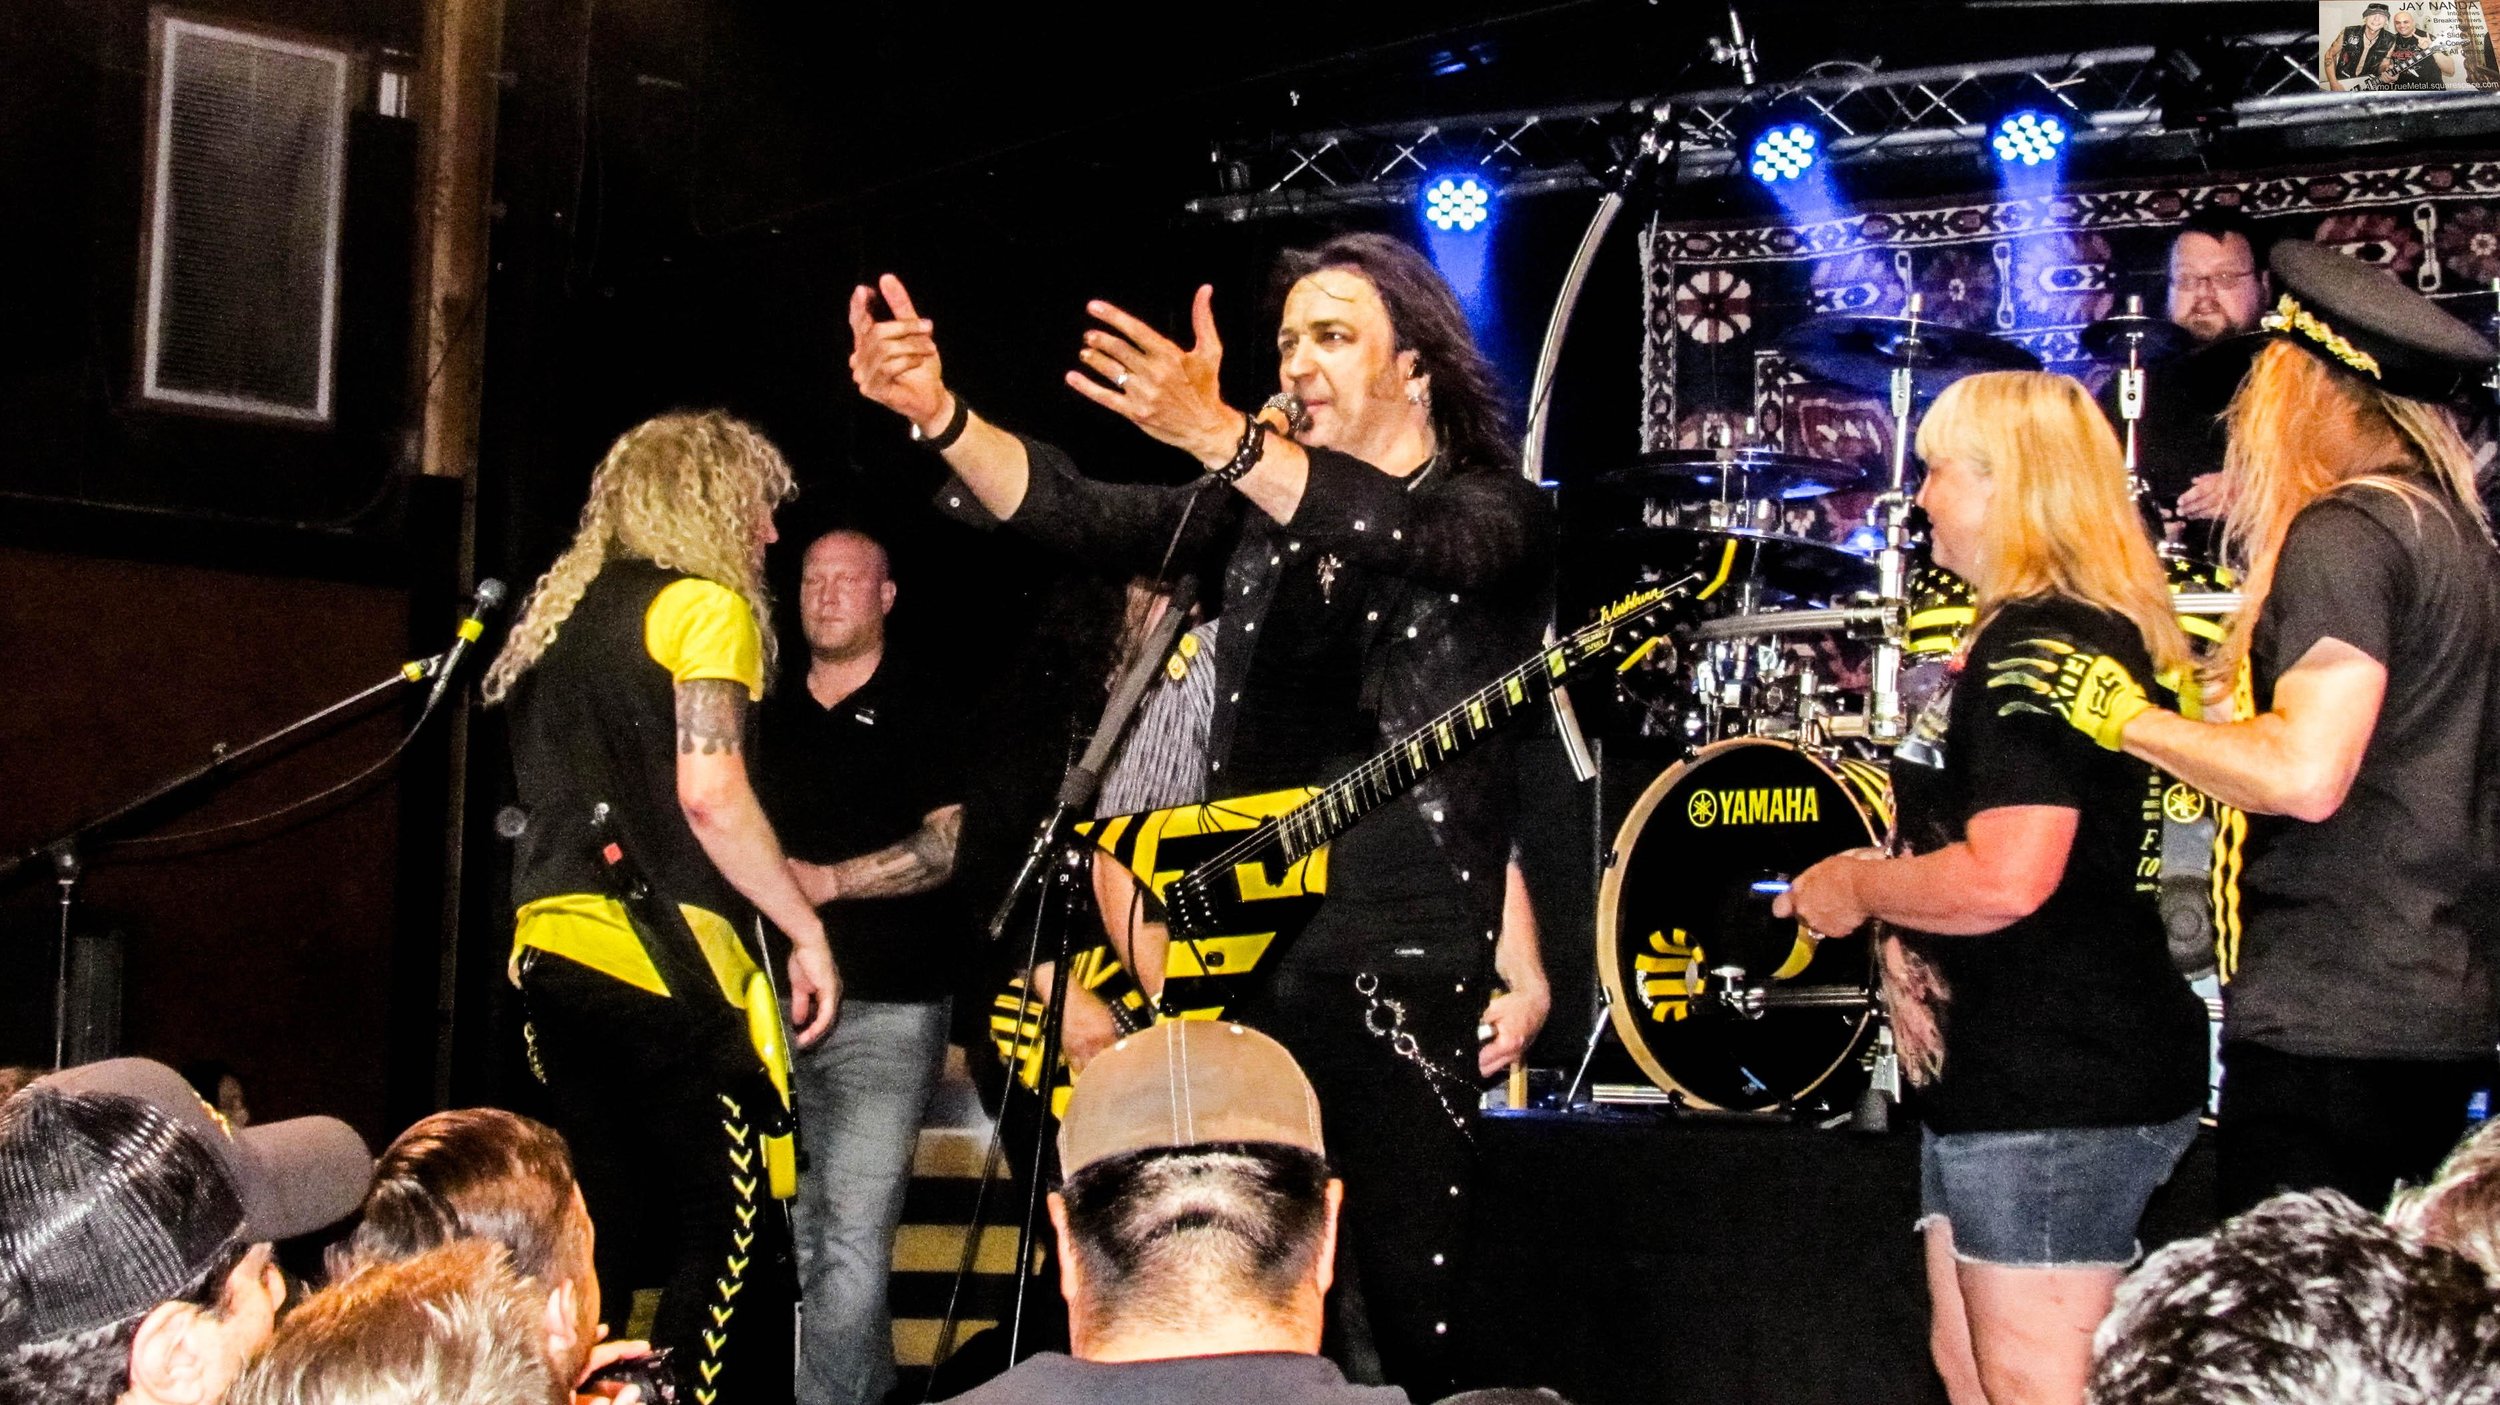  Stryper calls up a couple that paid to have their picture taken on stage with the band and the crowd while Michael Sweet encourages more approval. 